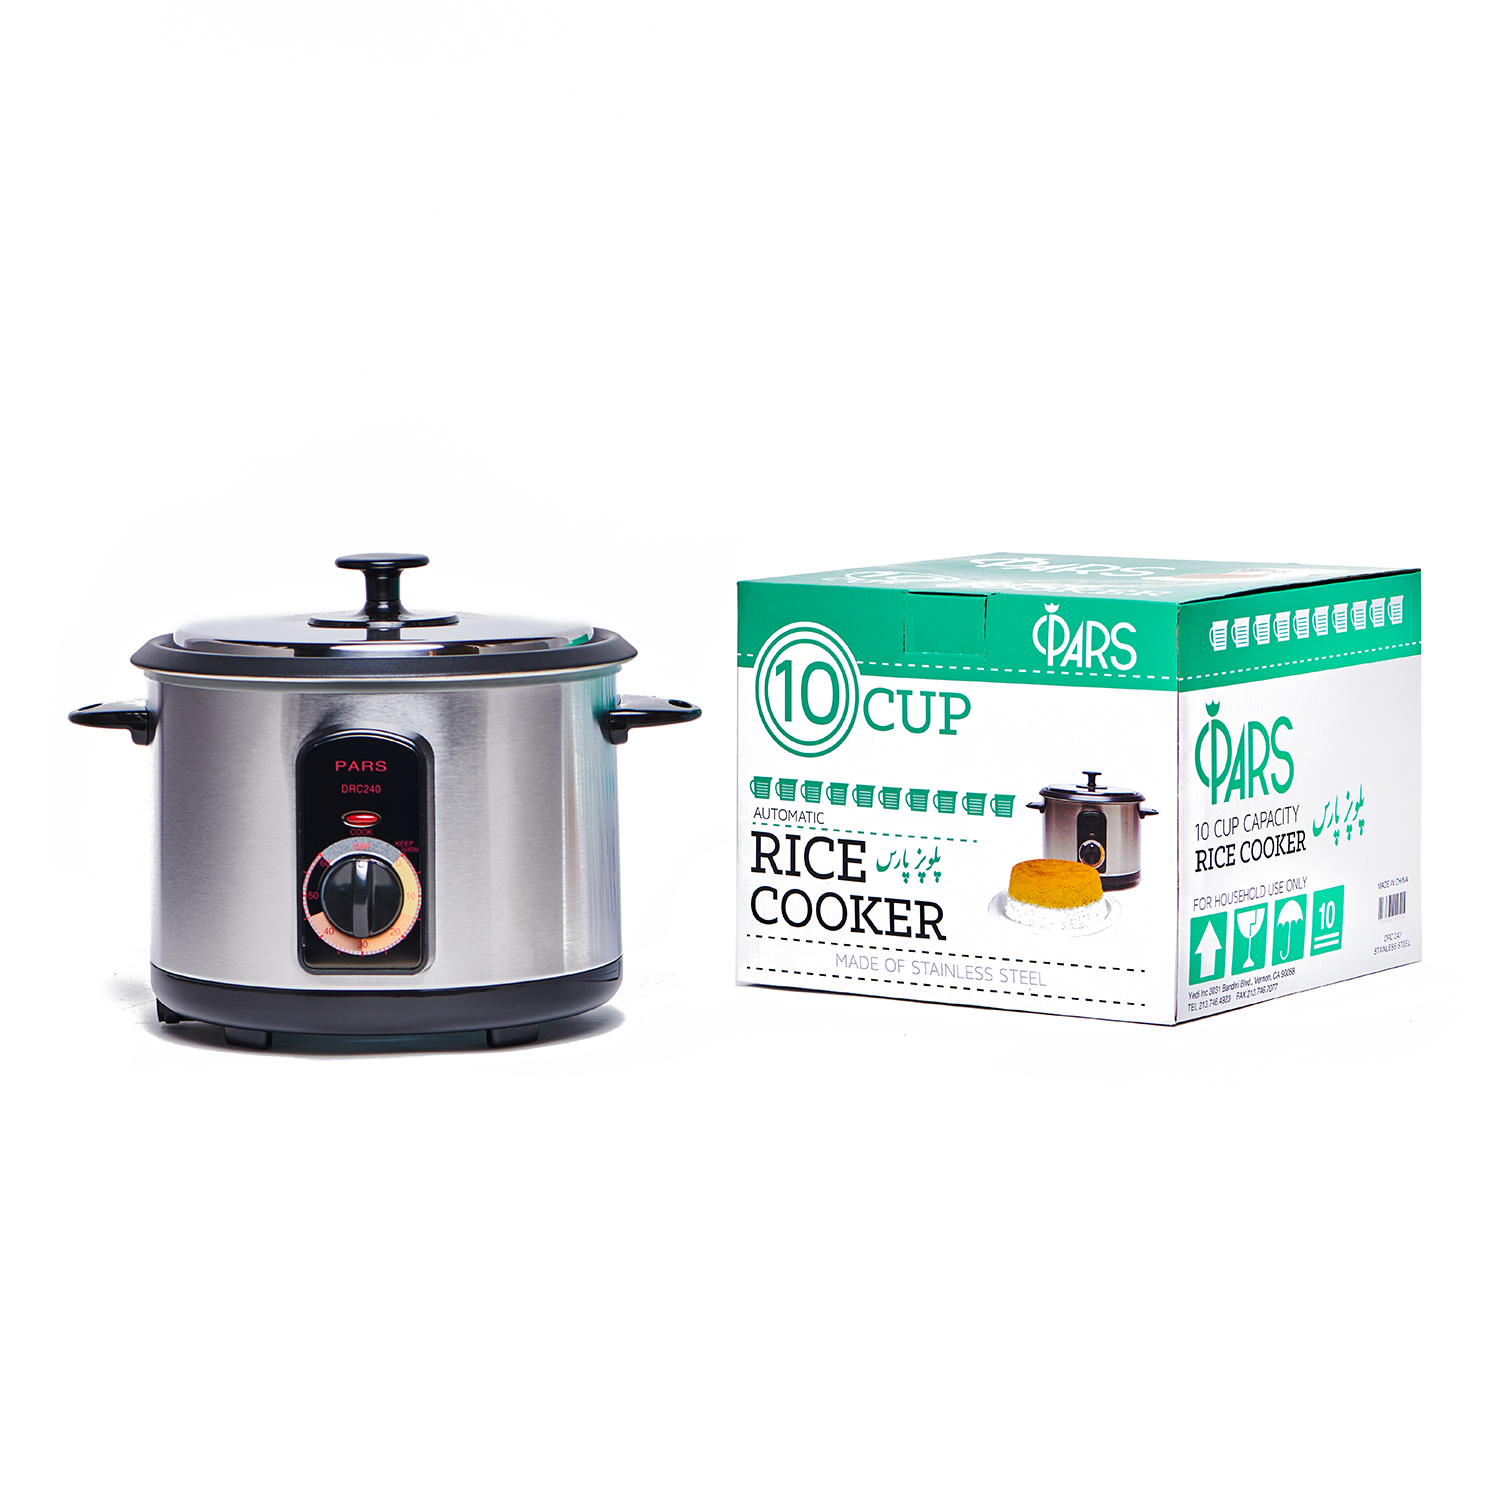 Pars 10 Cup Rice Cooker - Polopaz - پلوپز